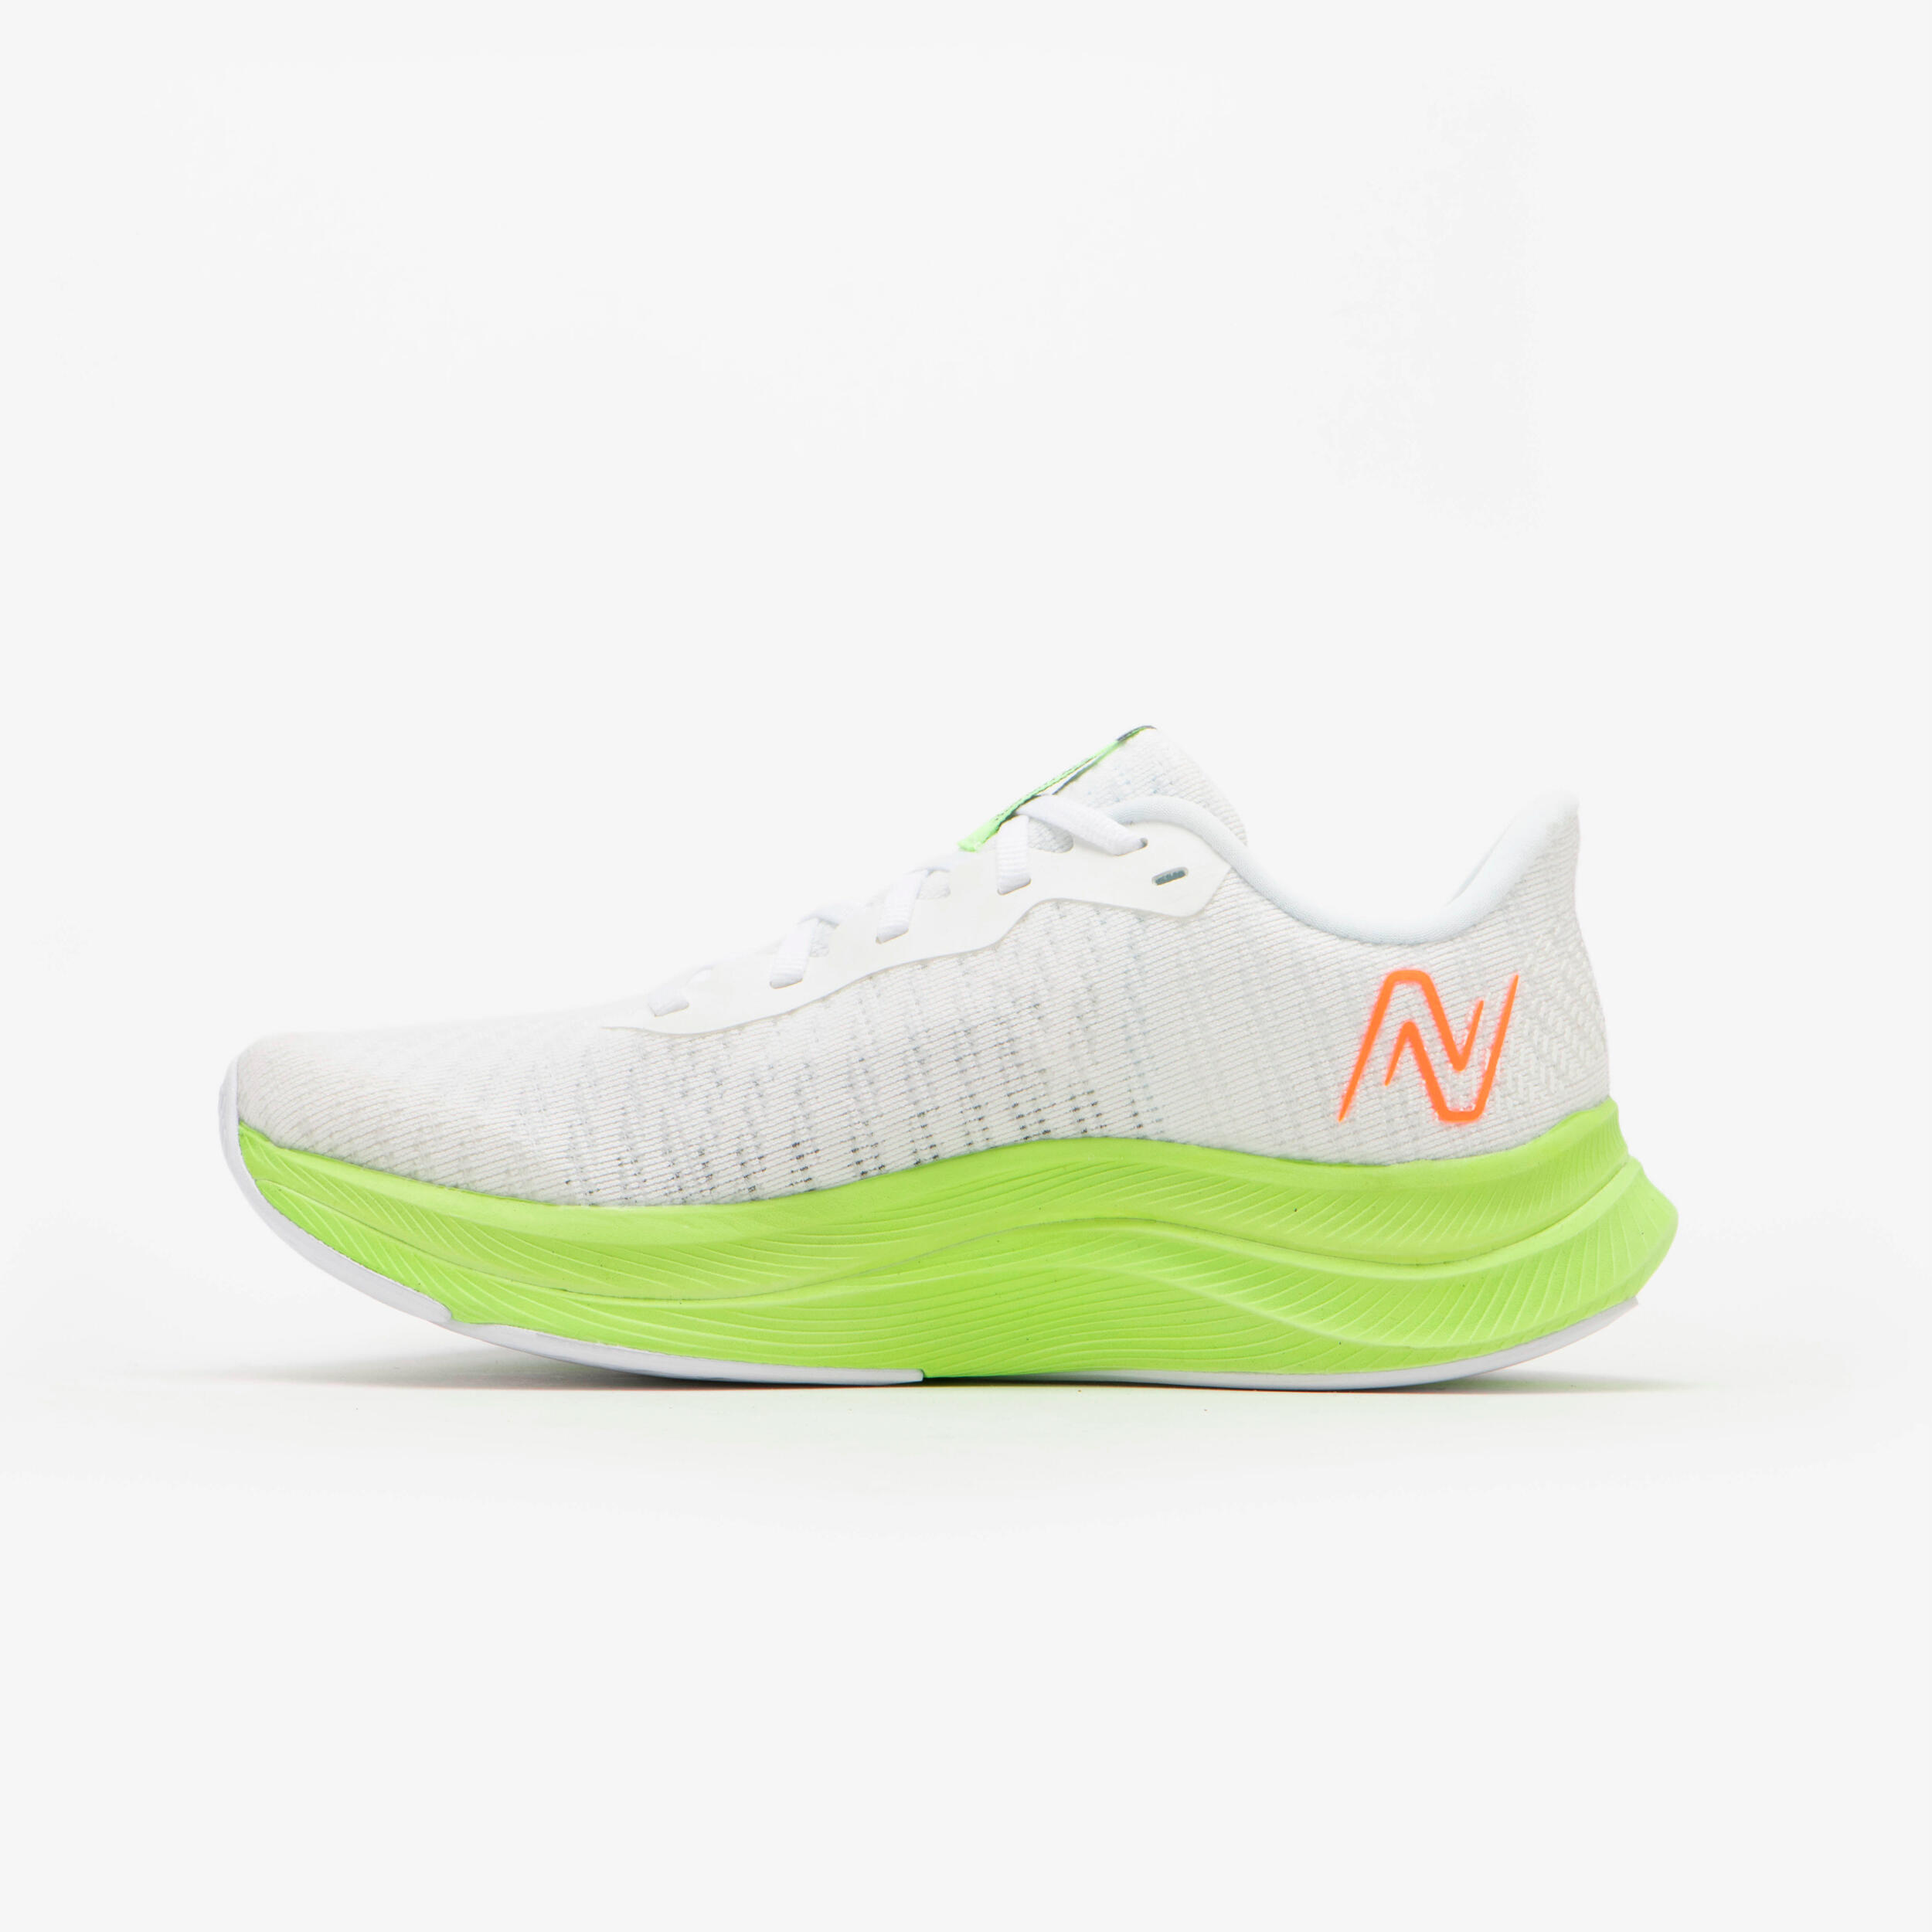 WOMEN'S NEW BALANCE FUELCELL PROPEL V4 RUNNING SHOES - WHITE AND NEON GREEN 3/7